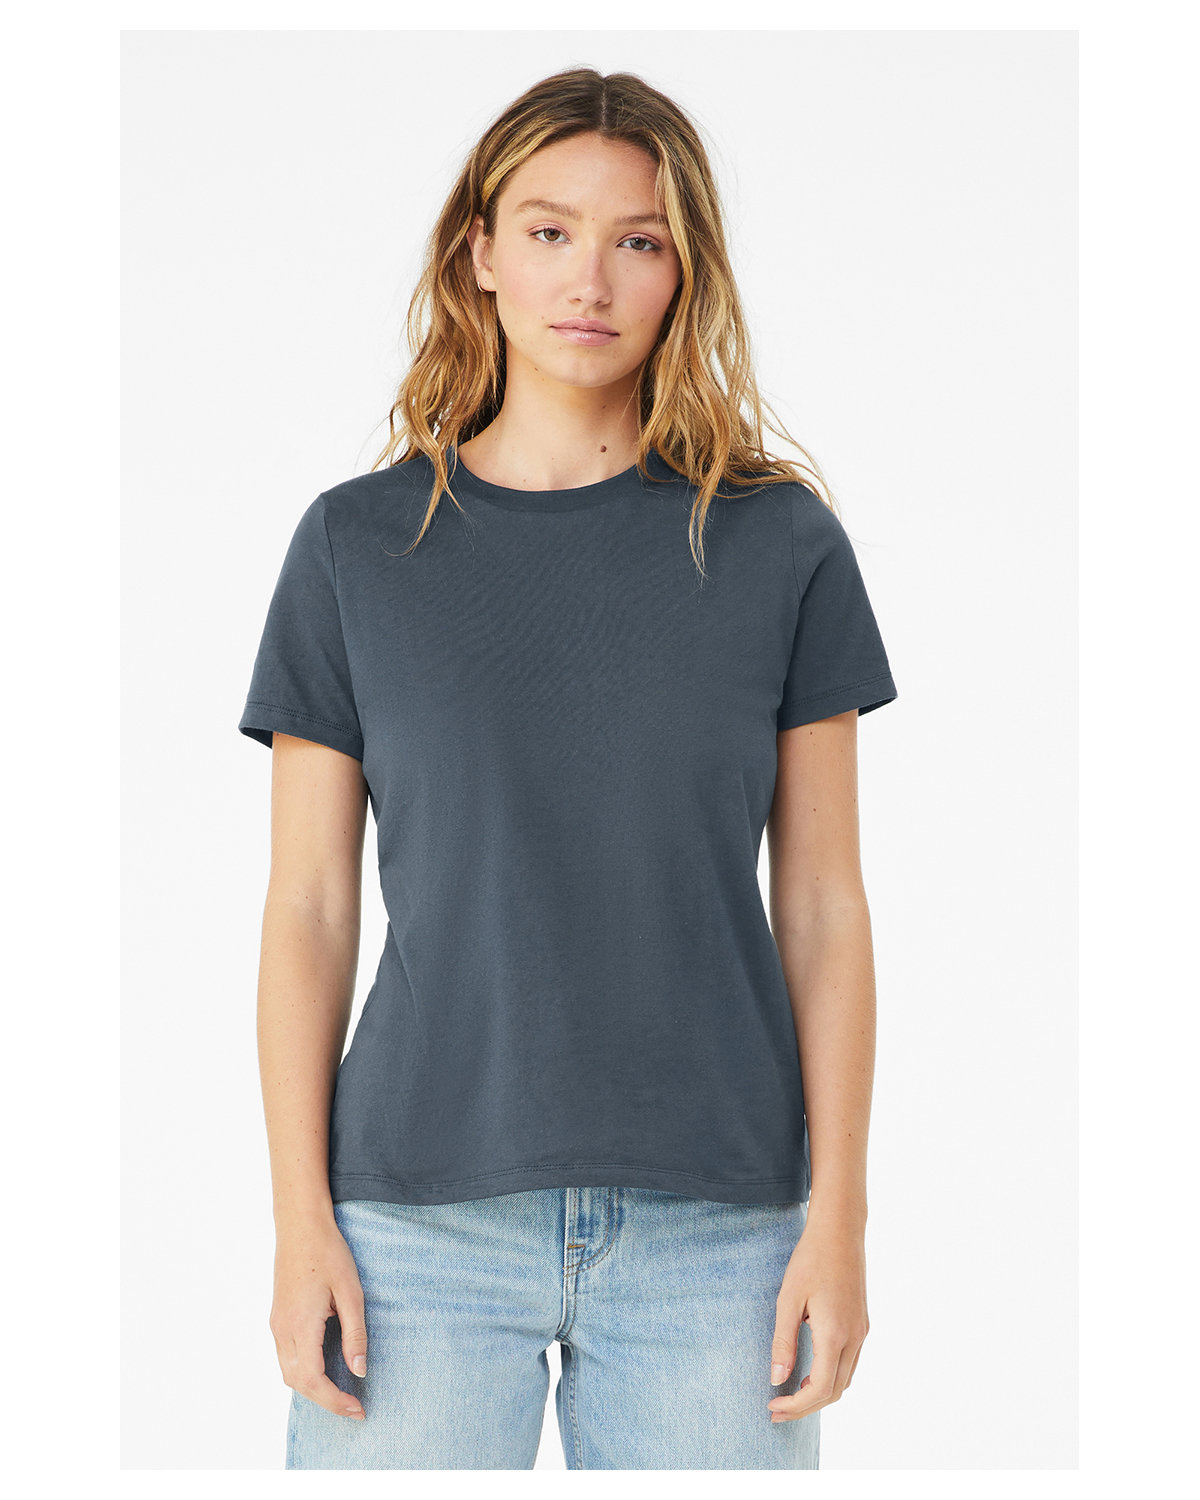 Bella + Canvas Ladies' Relaxed Jersey Short-Sleeve T-Shirt vintage navy 